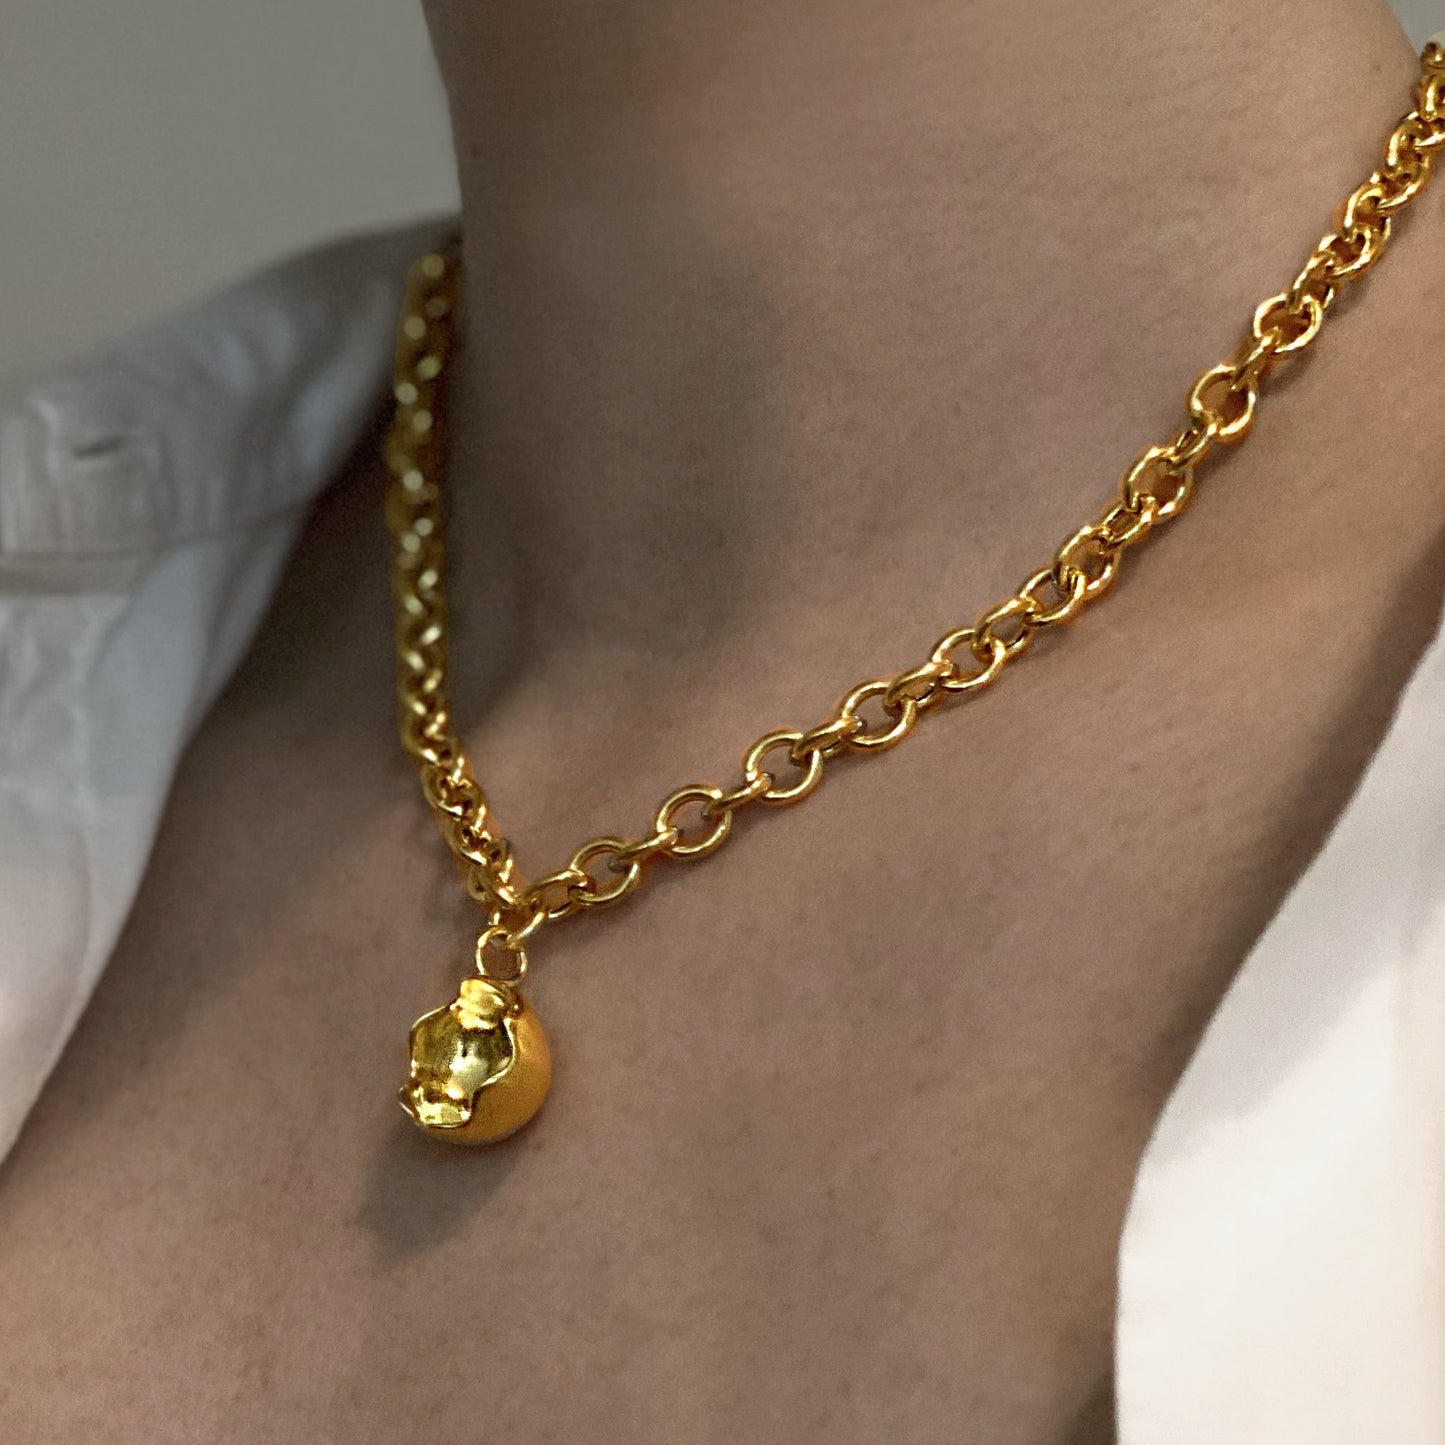 Close up of female neck and chest wearing a chunky chain necklace in gold